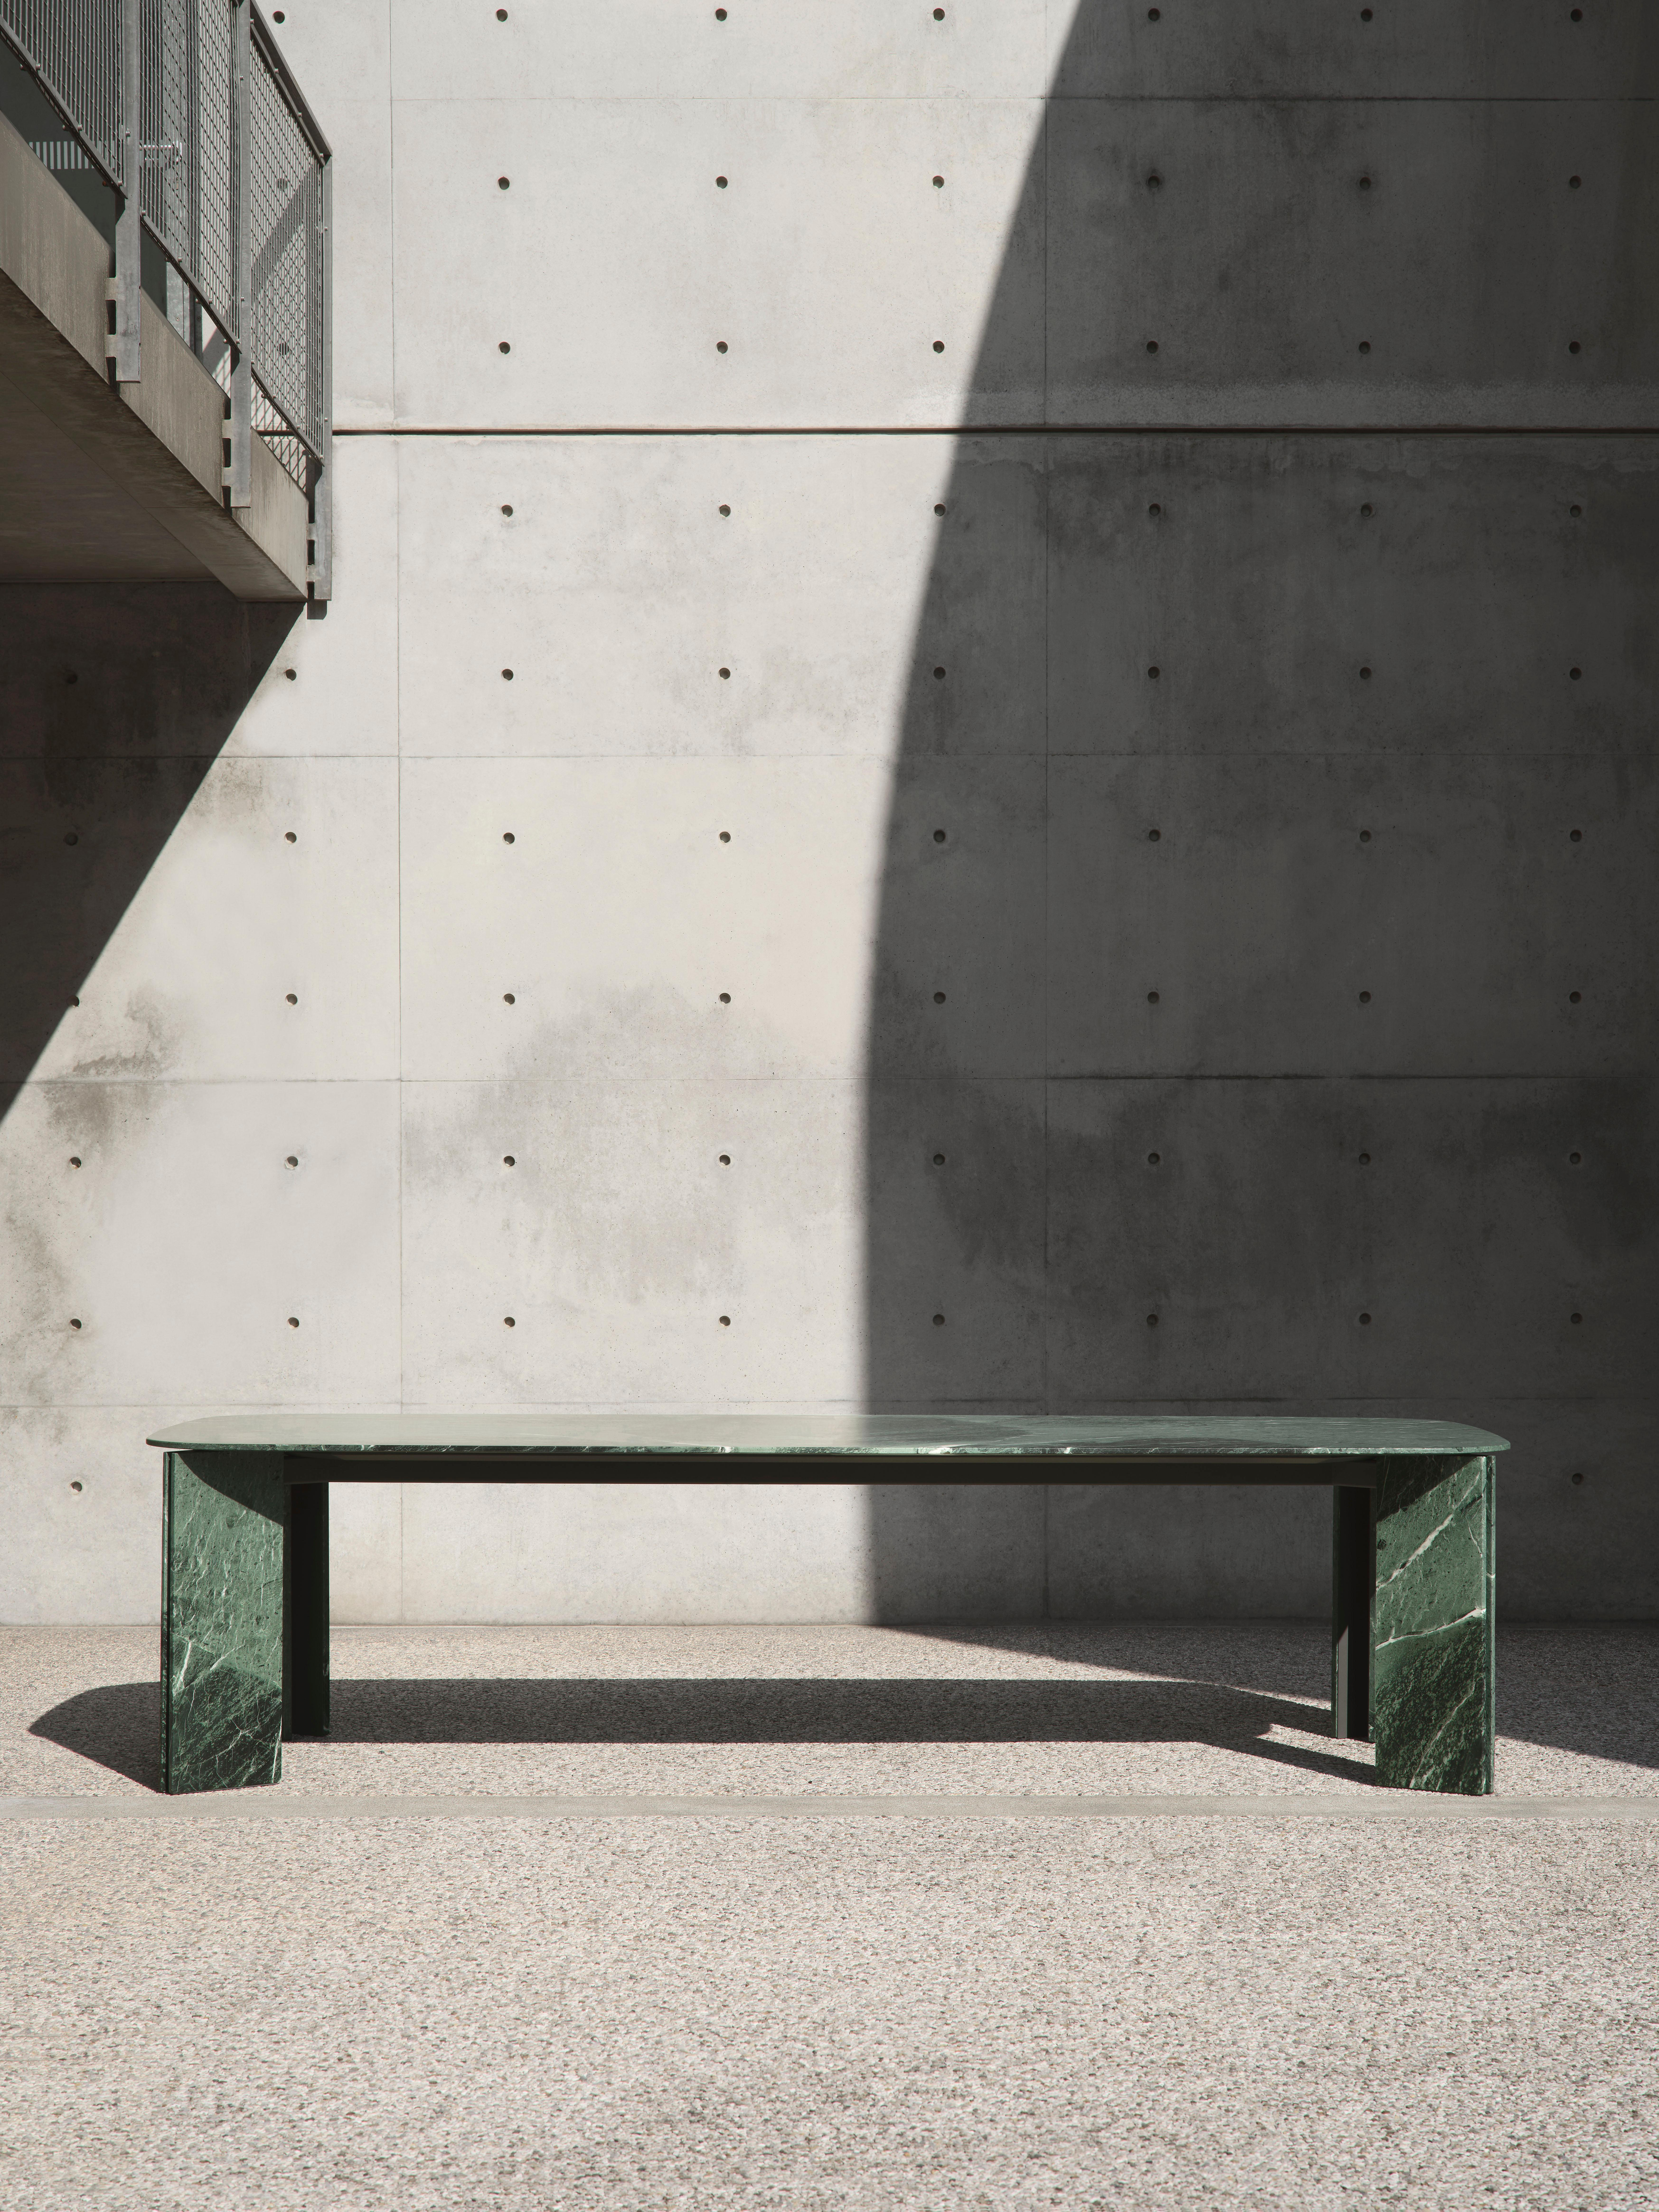 Large table, made of stone and metal. Top of stone thick cm 2 with tapered edges, divided into sections, supported by a wooden panel. Particularly shaped legs with a ''V'' section made of an innovative and contrasting material combination of stone